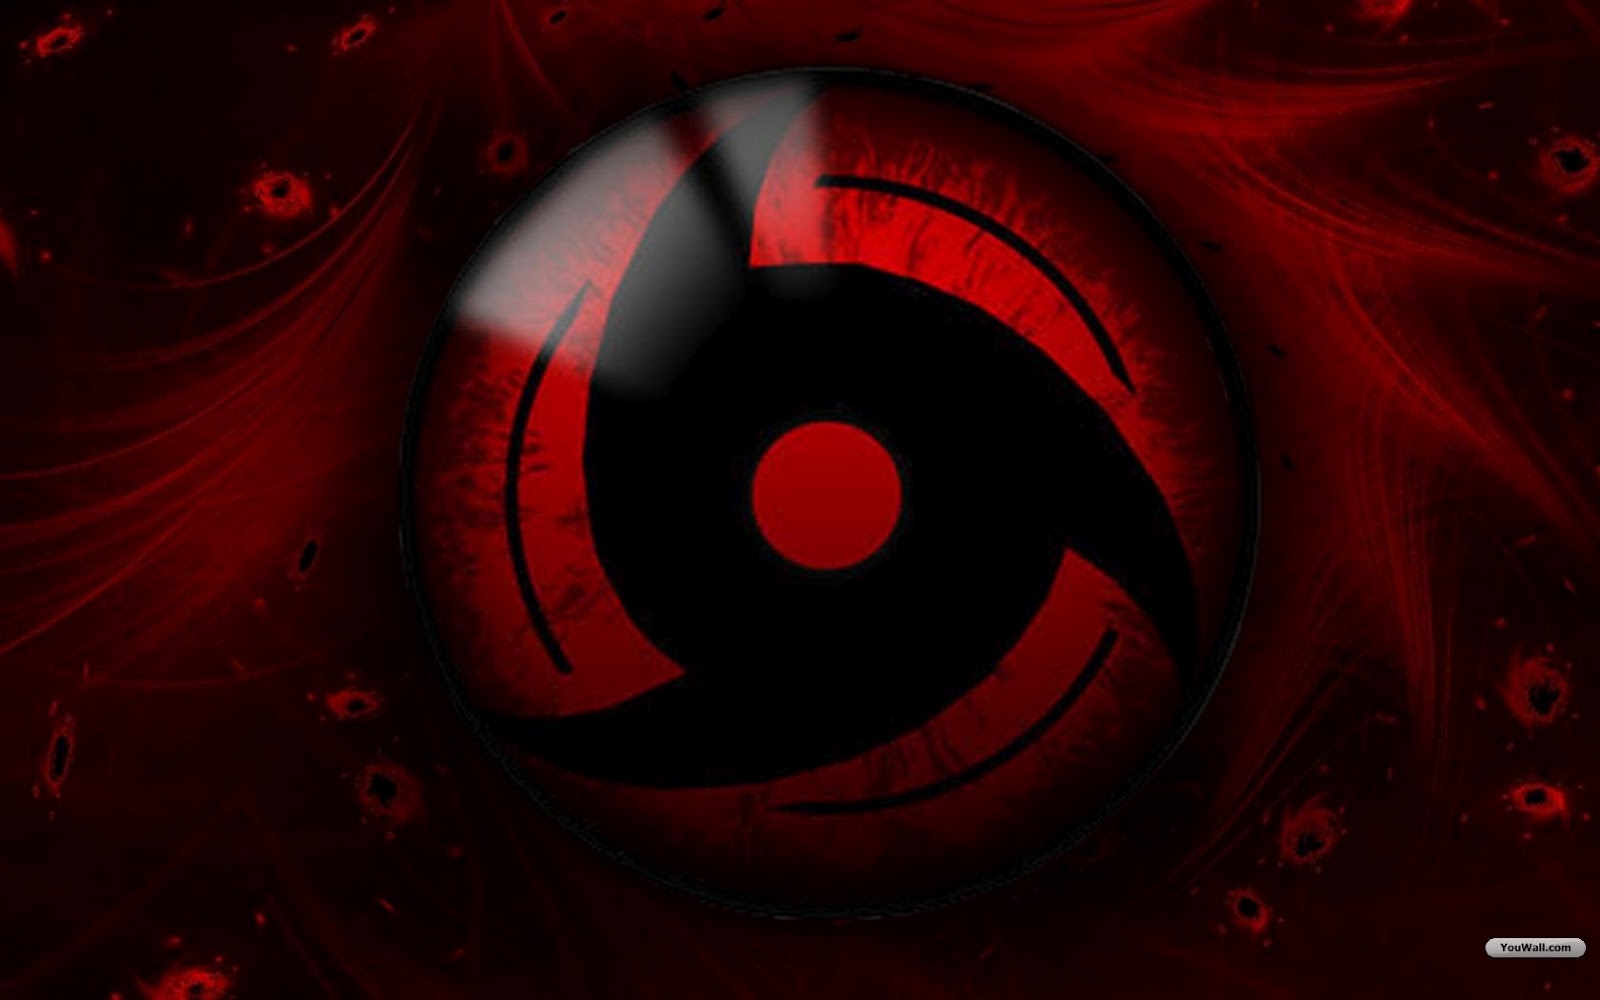 Sharingan Eye Wallpaper Hd Images amp Pictures   Becuo 1600x1000